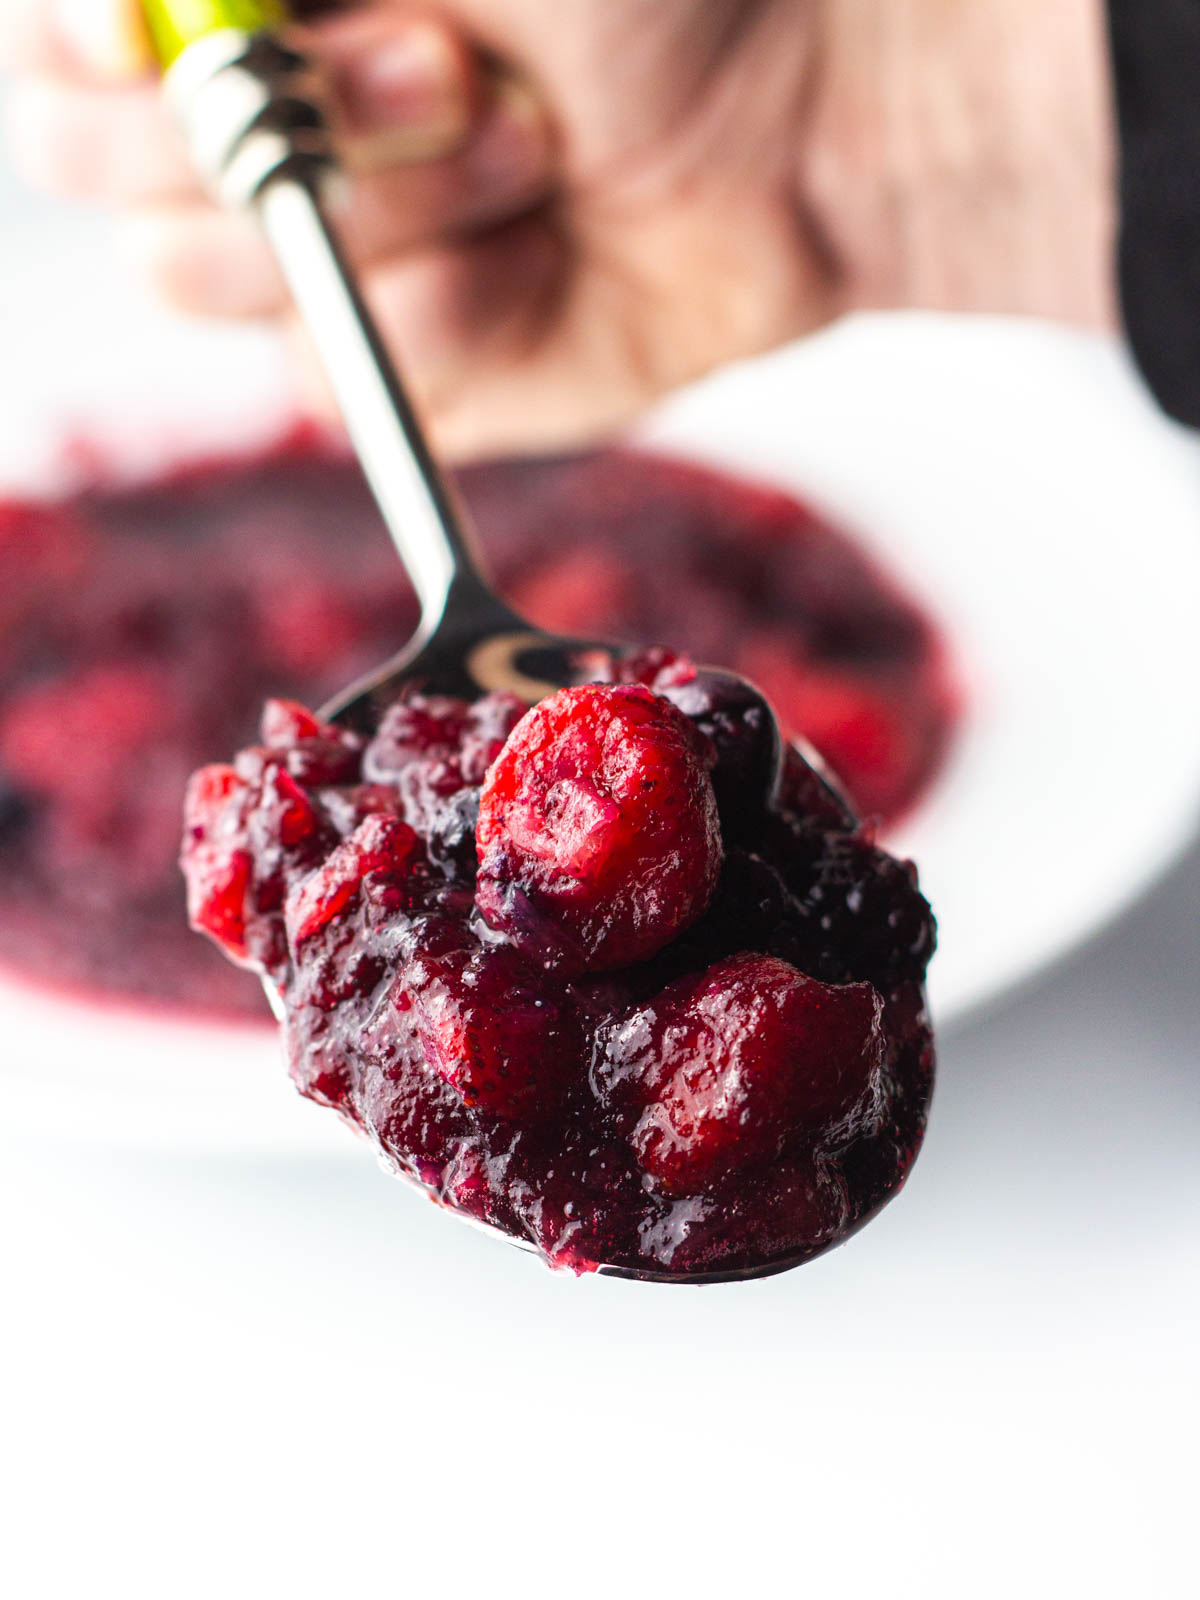 A hand holding a spoon full of bourbon cranberry sauce close to the camera with the bowl of the rest of the cranberry sauce blurred in the background.